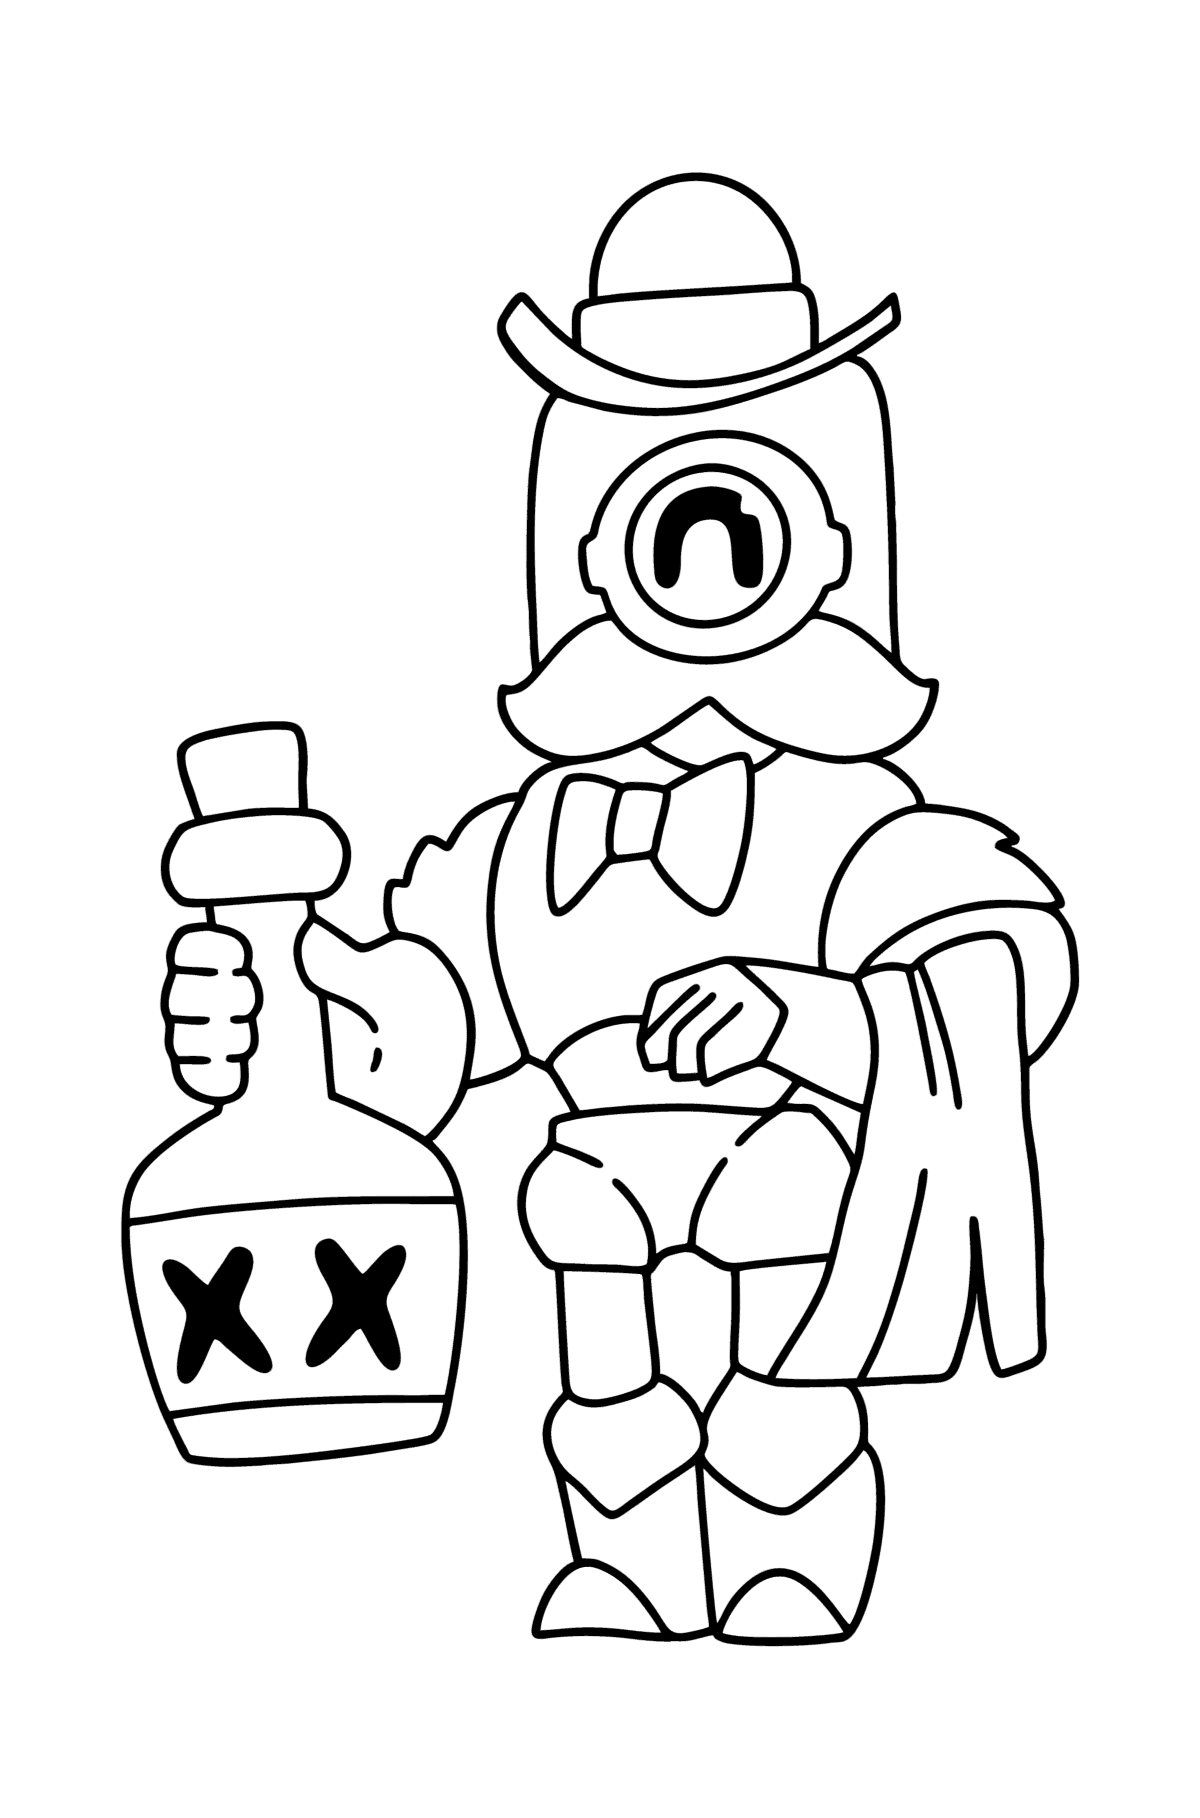 Brawl Stars Barley colouring page - Coloring Pages for Kids